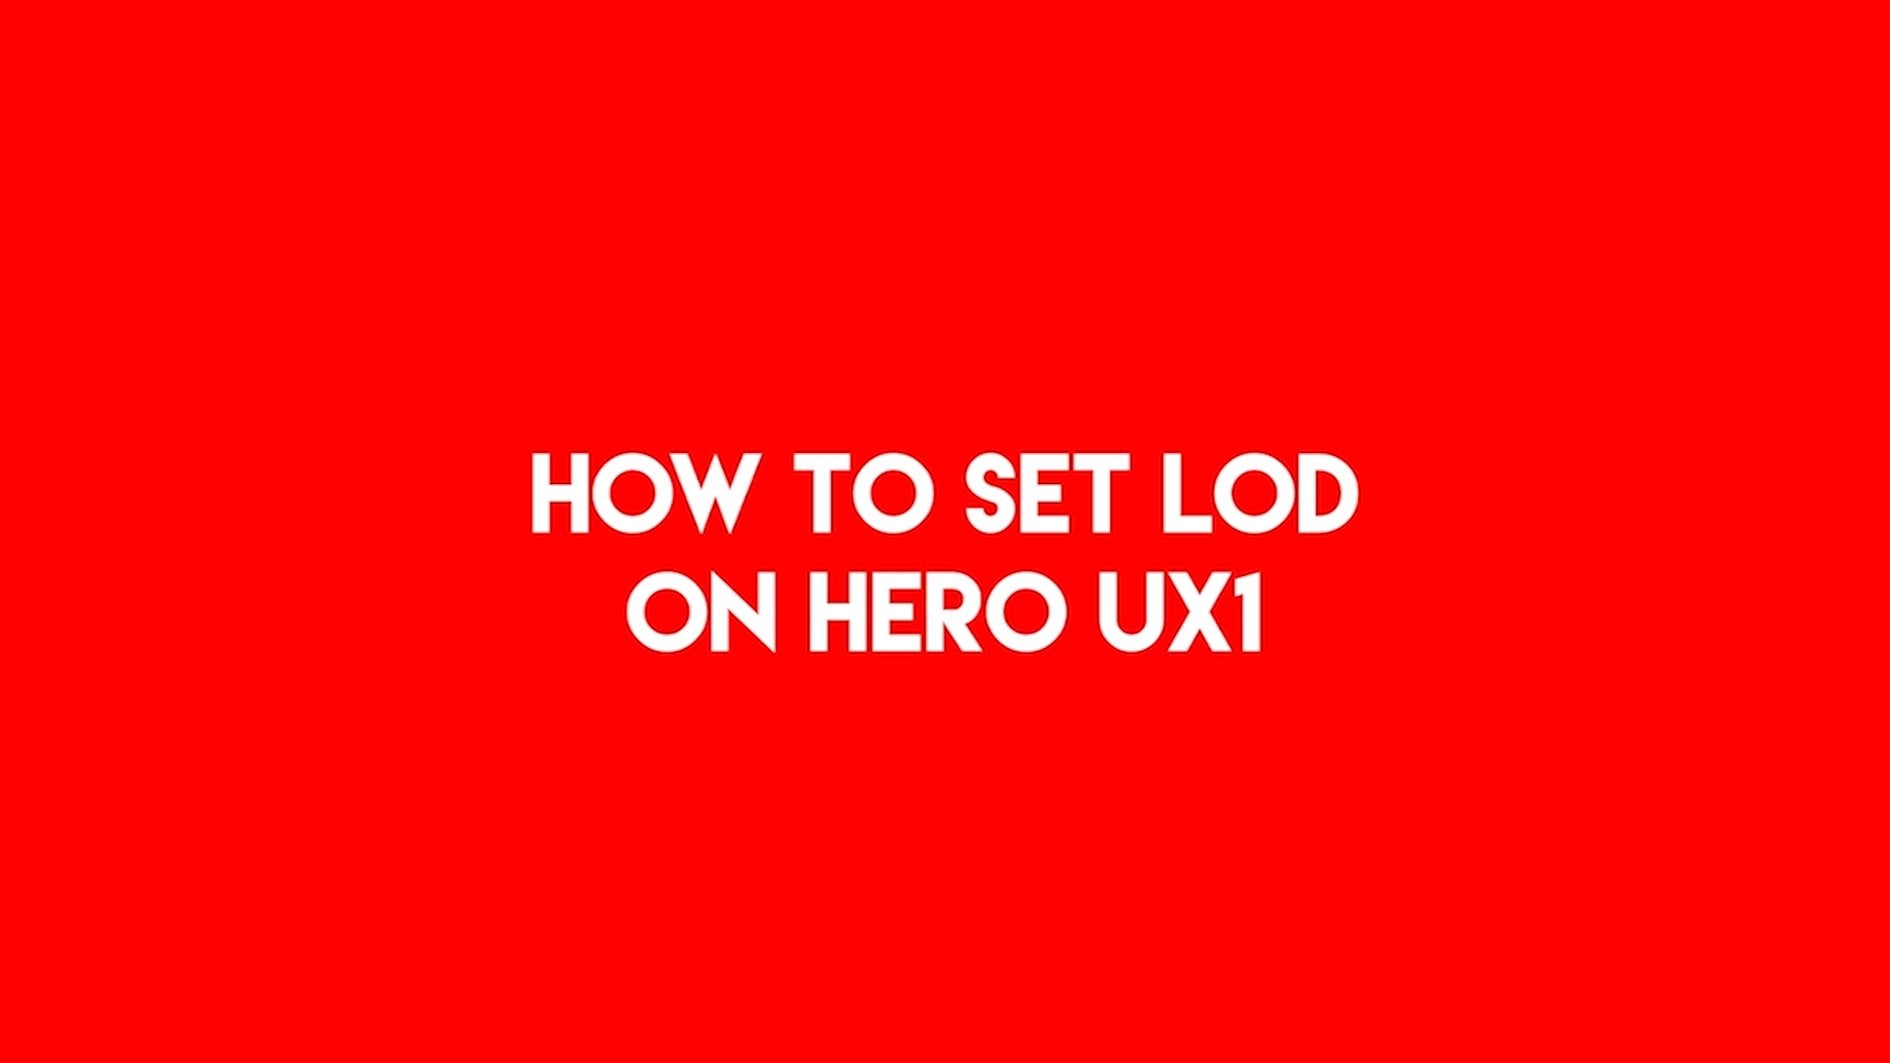 How to set LOD on HERO UX1